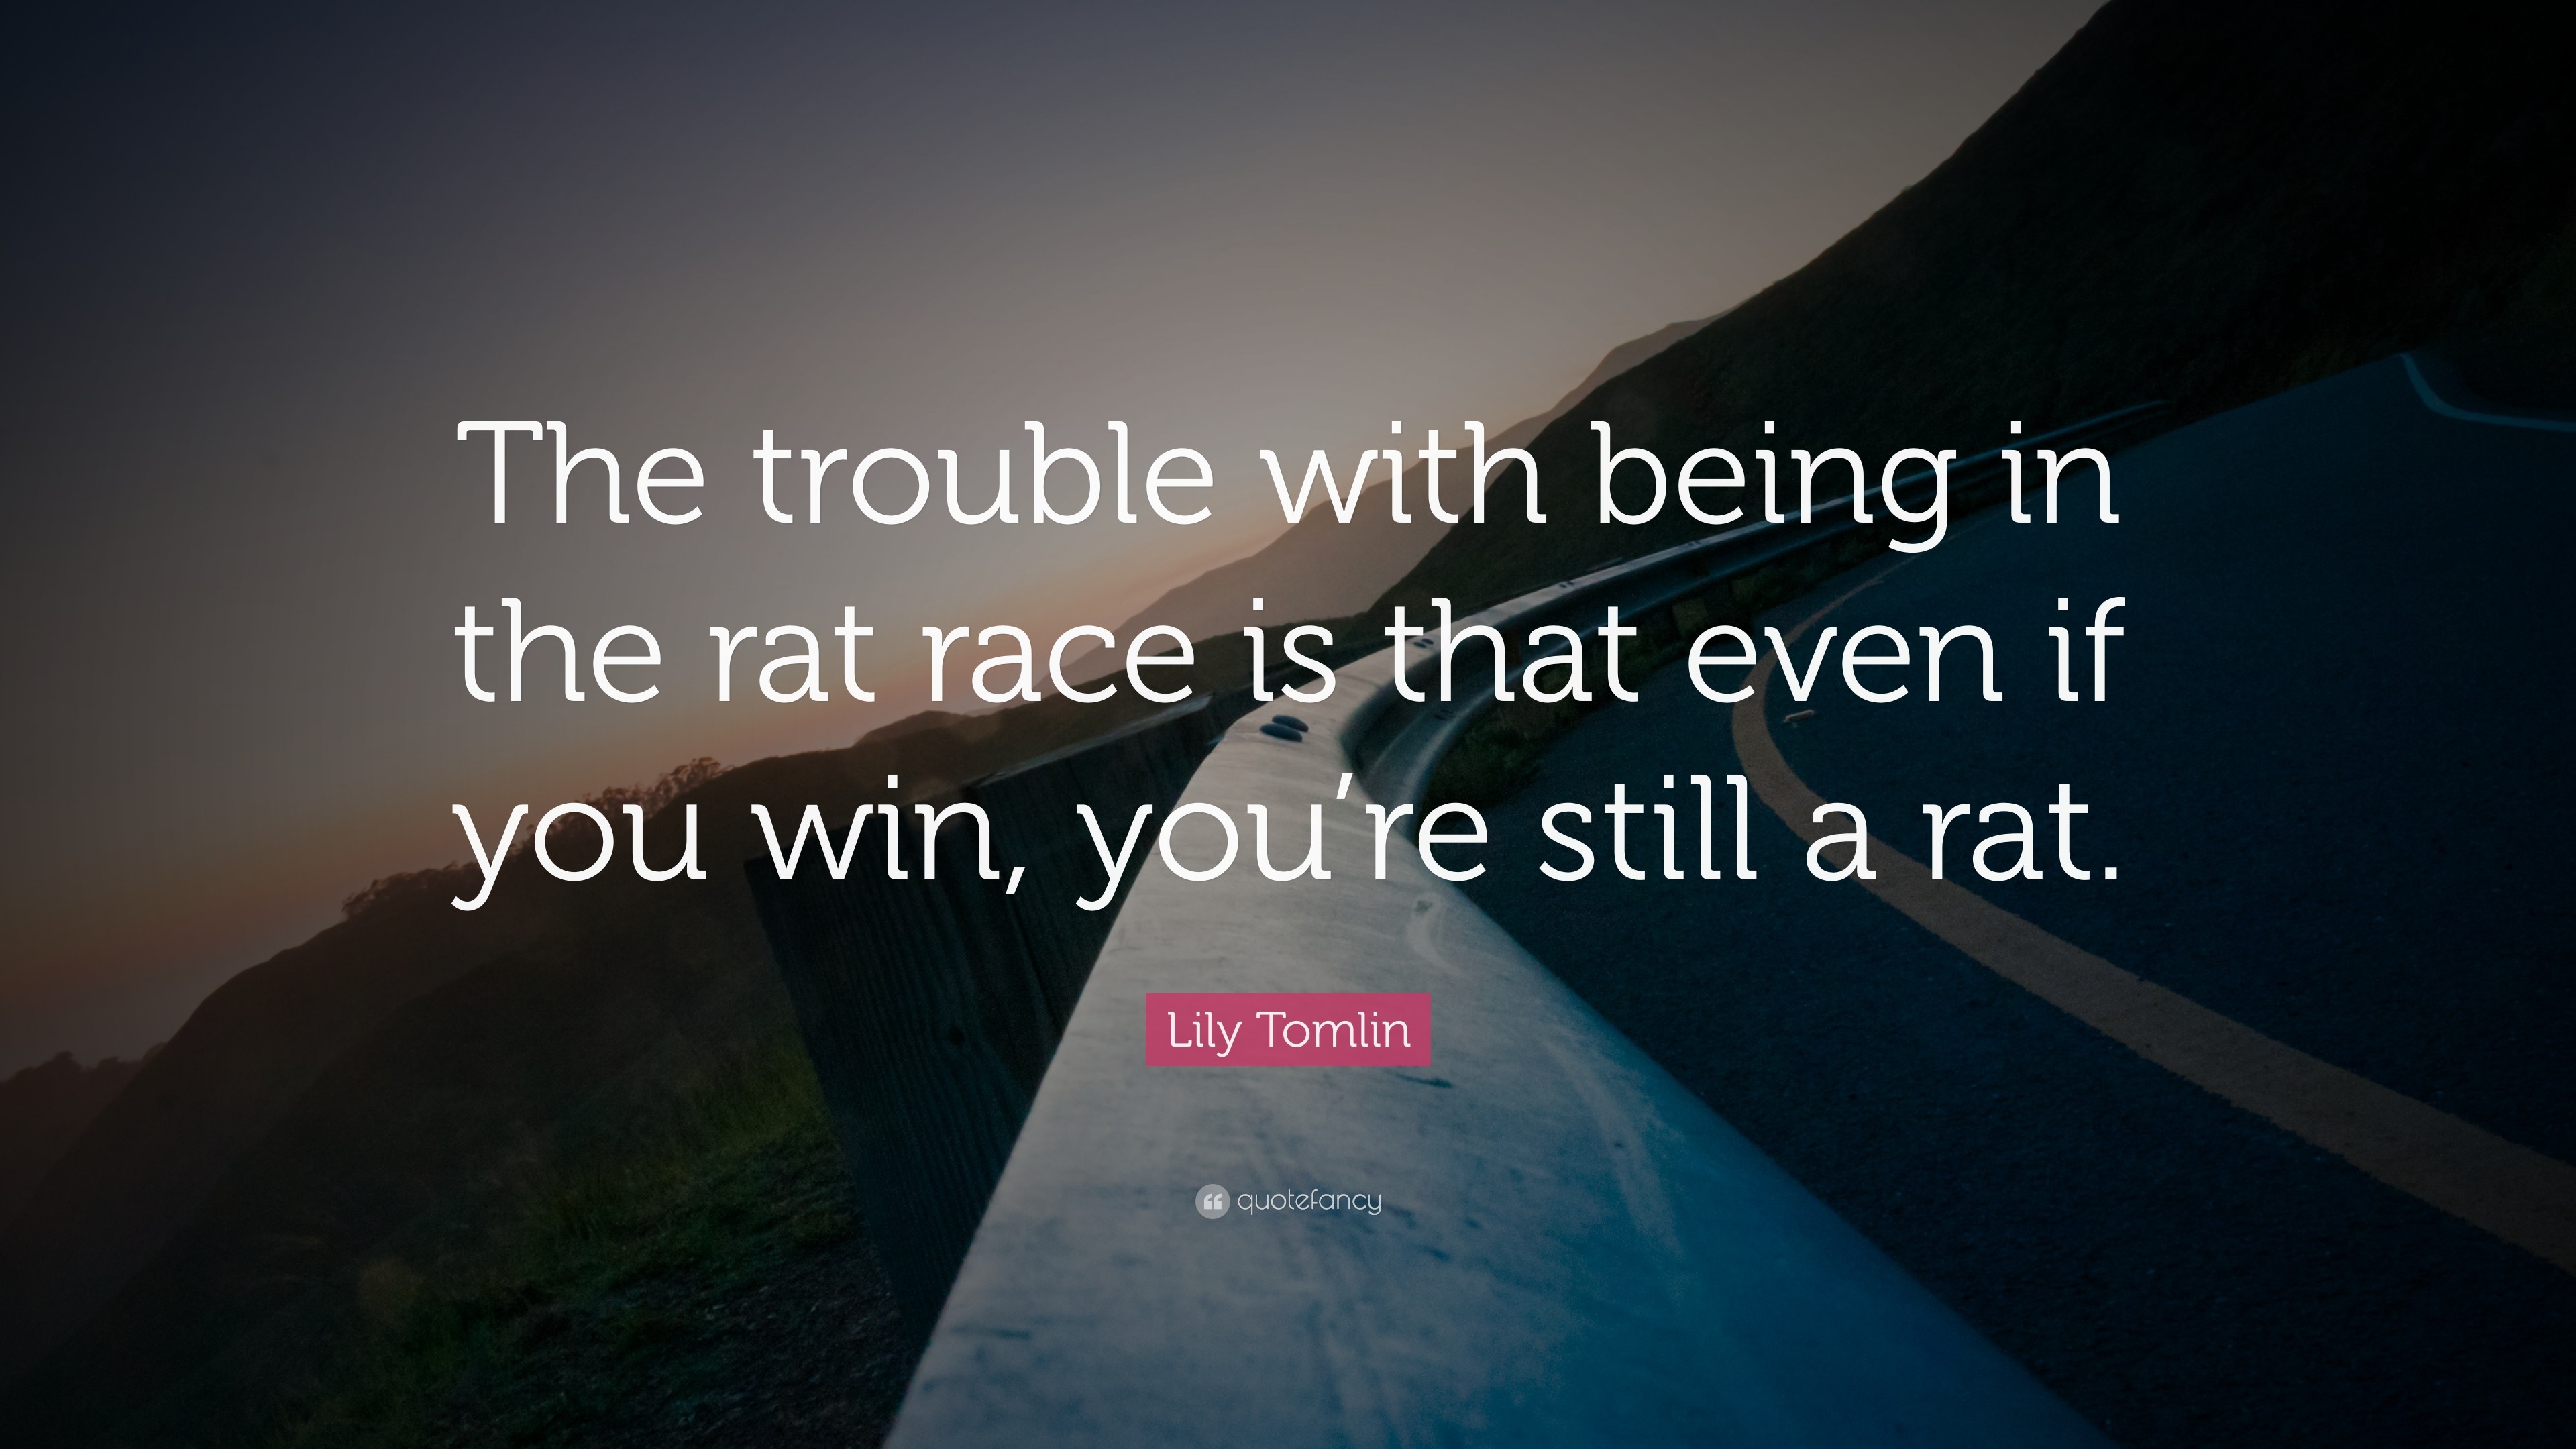 3840x2160 Funny Quotes: “The trouble with being in the rat race is that even if